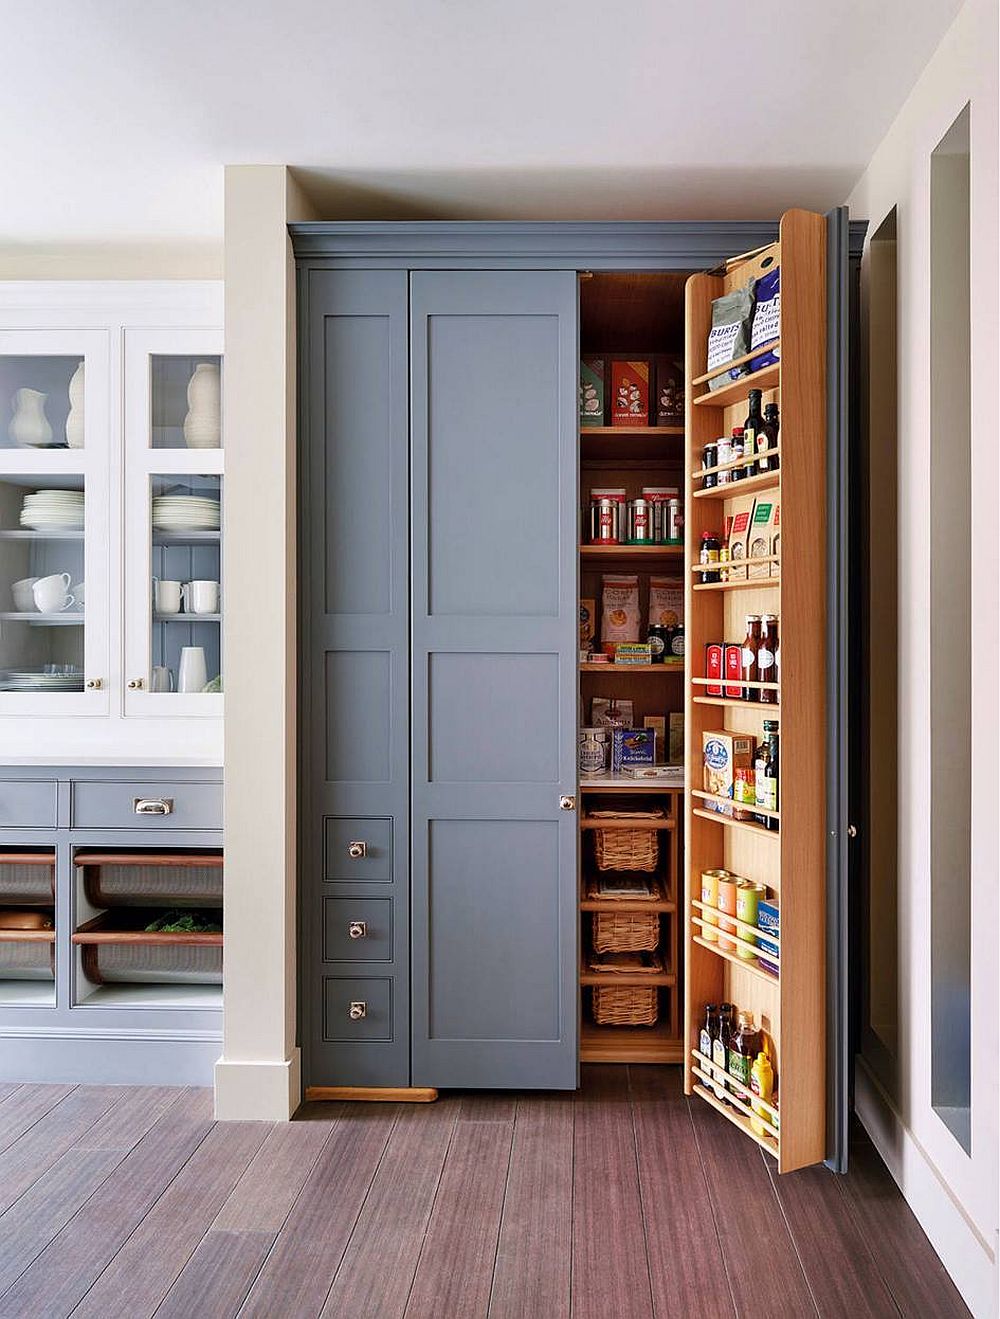 blue-gray pantry door with natural wood interior